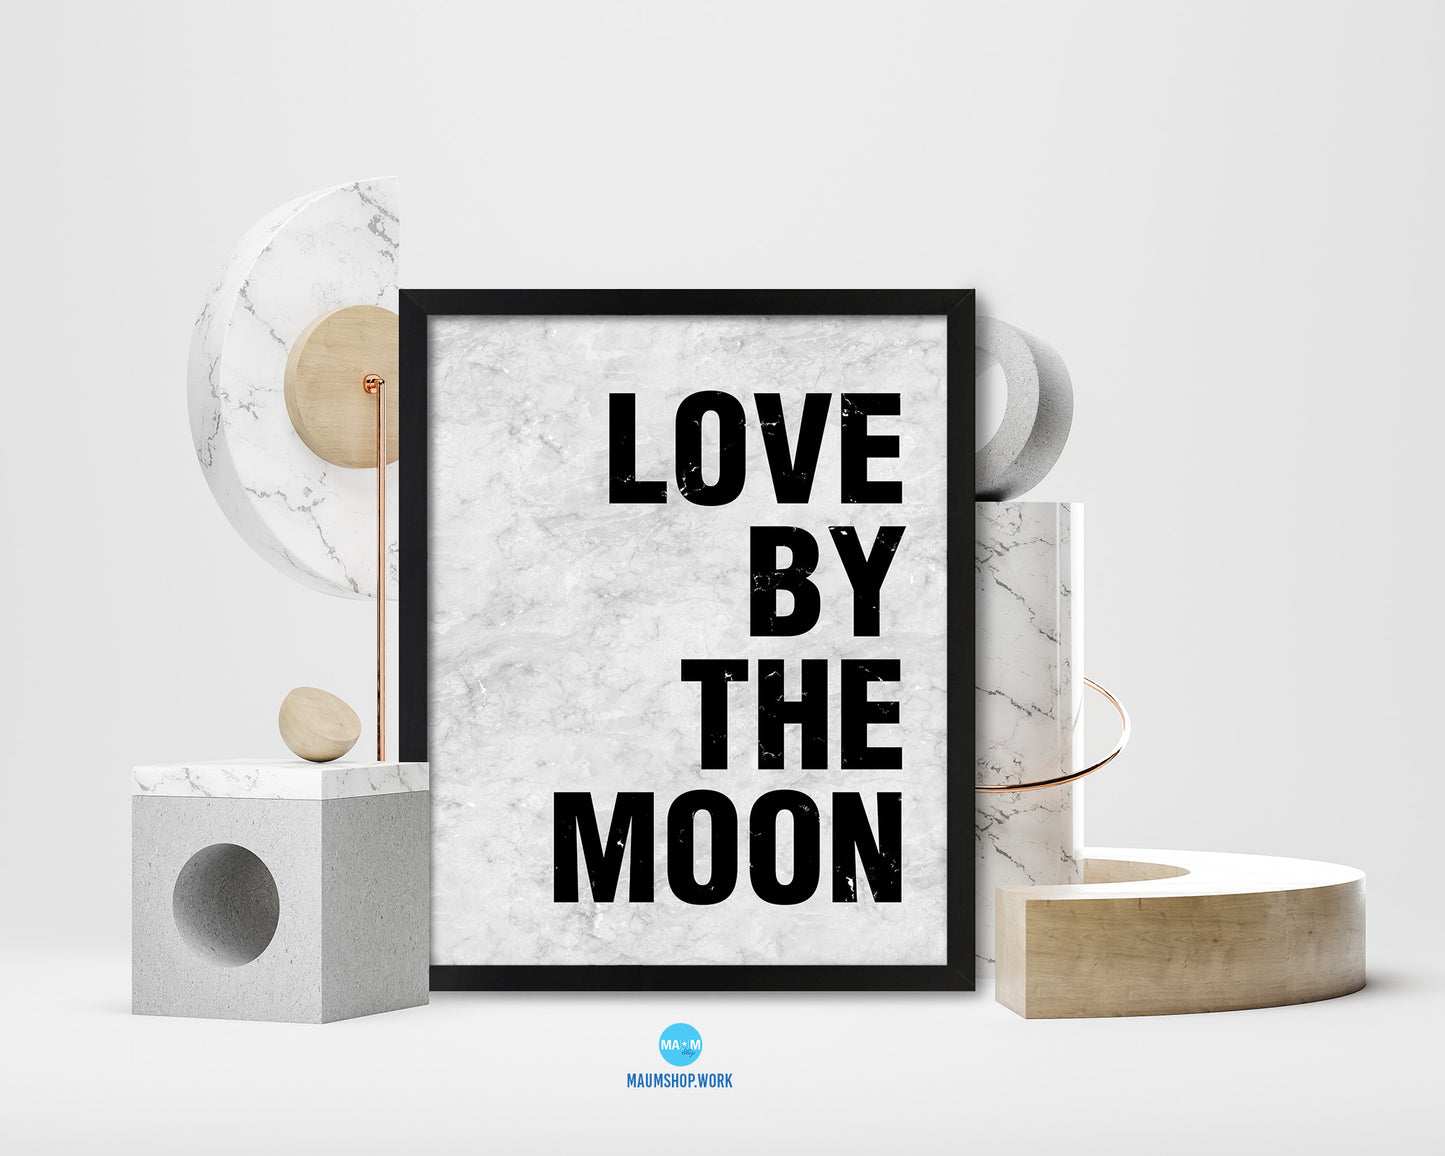 Love by the moon Quote Framed Print Wall Art Decor Gifts